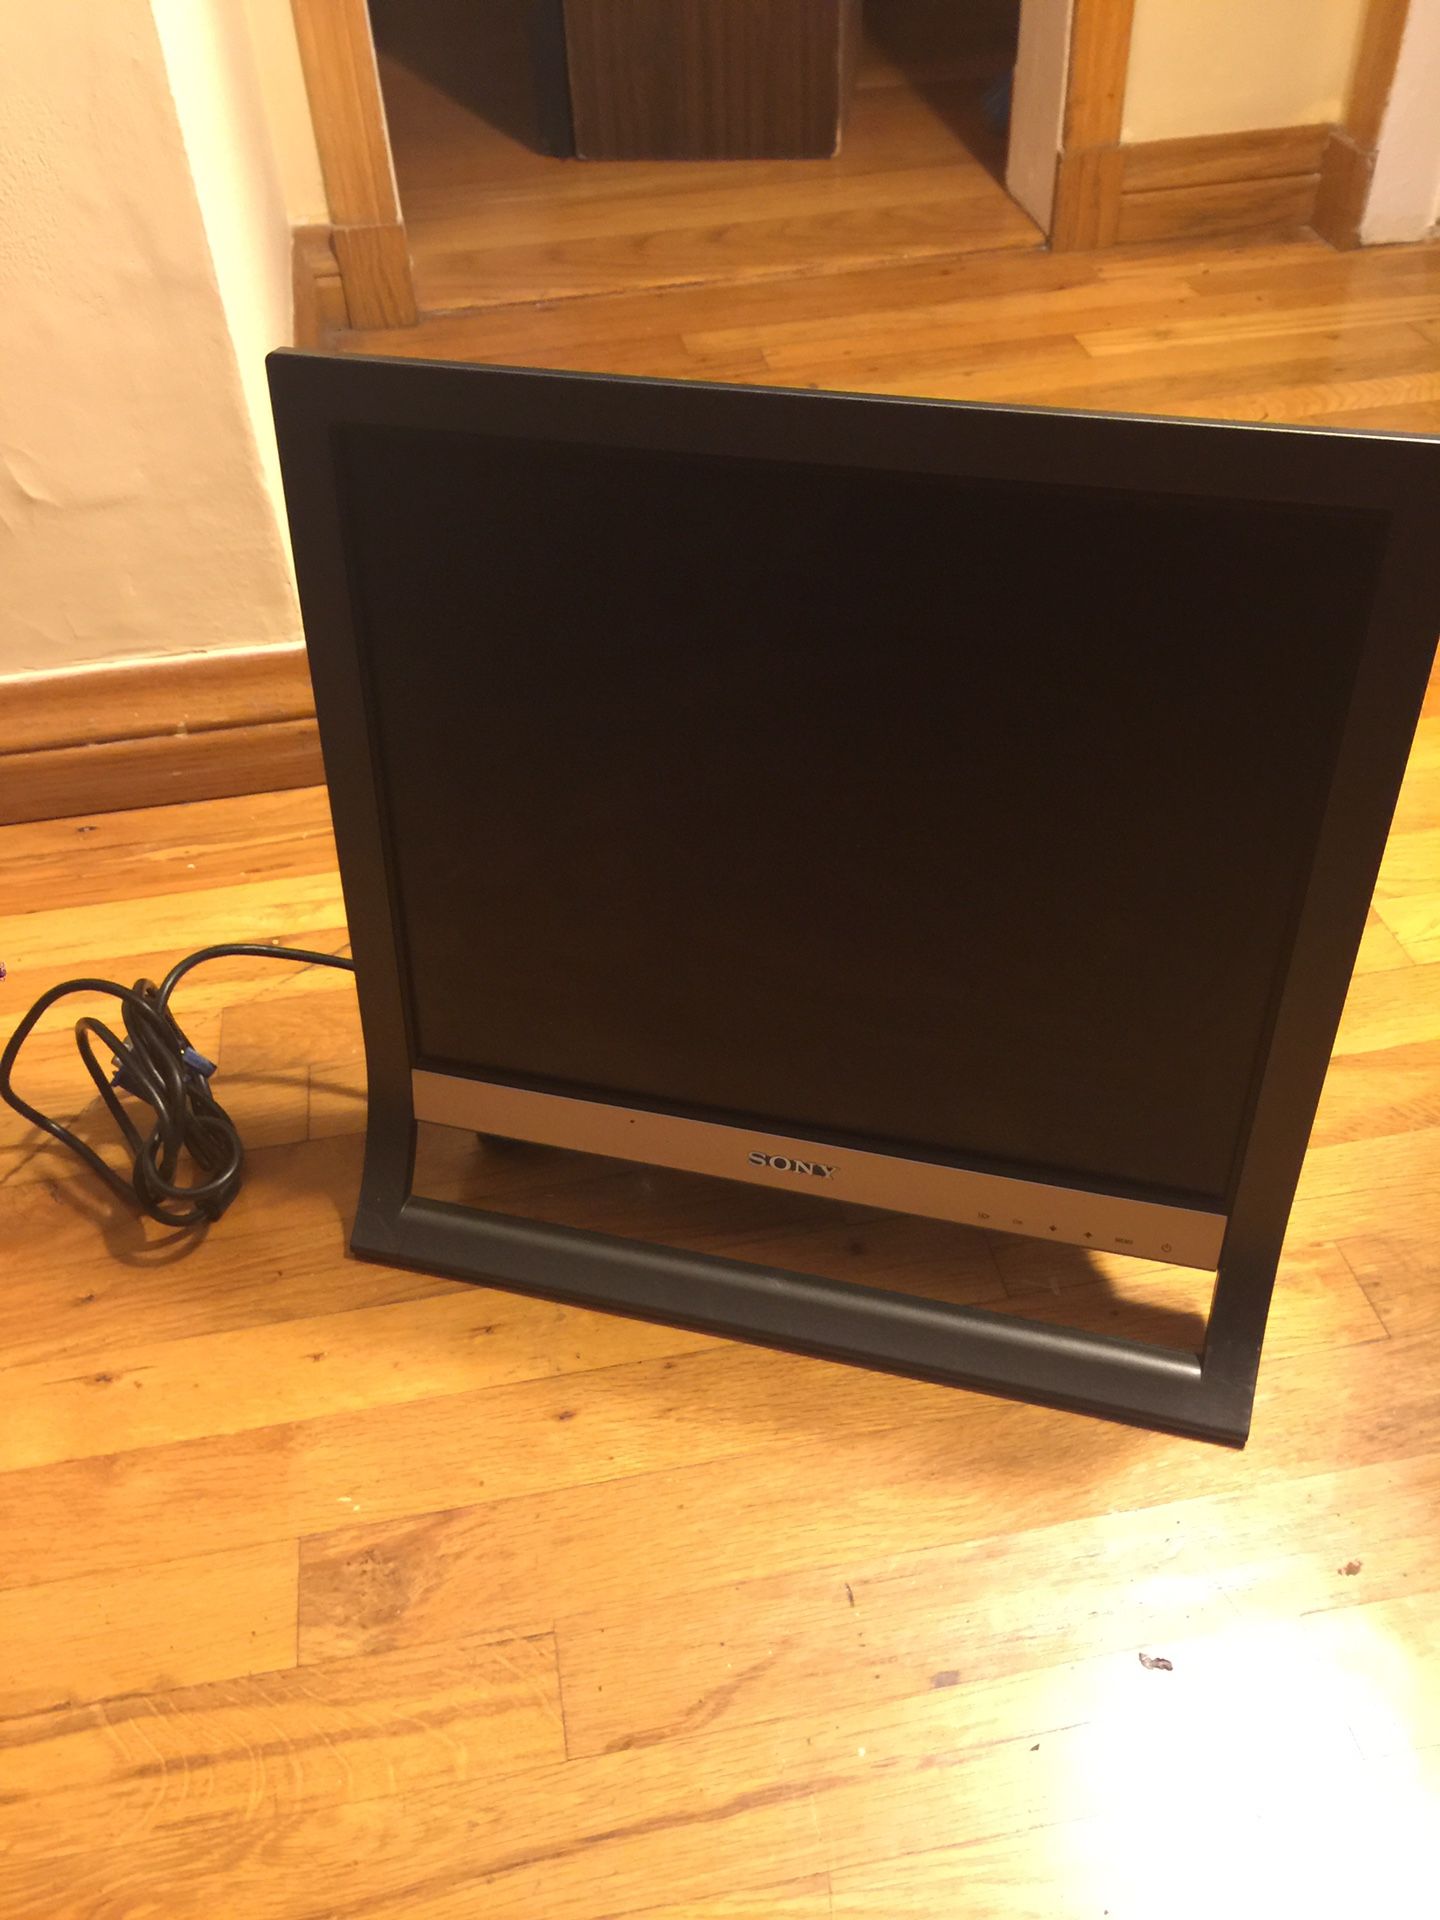 Sony Computer Monitor (12*15 inches)